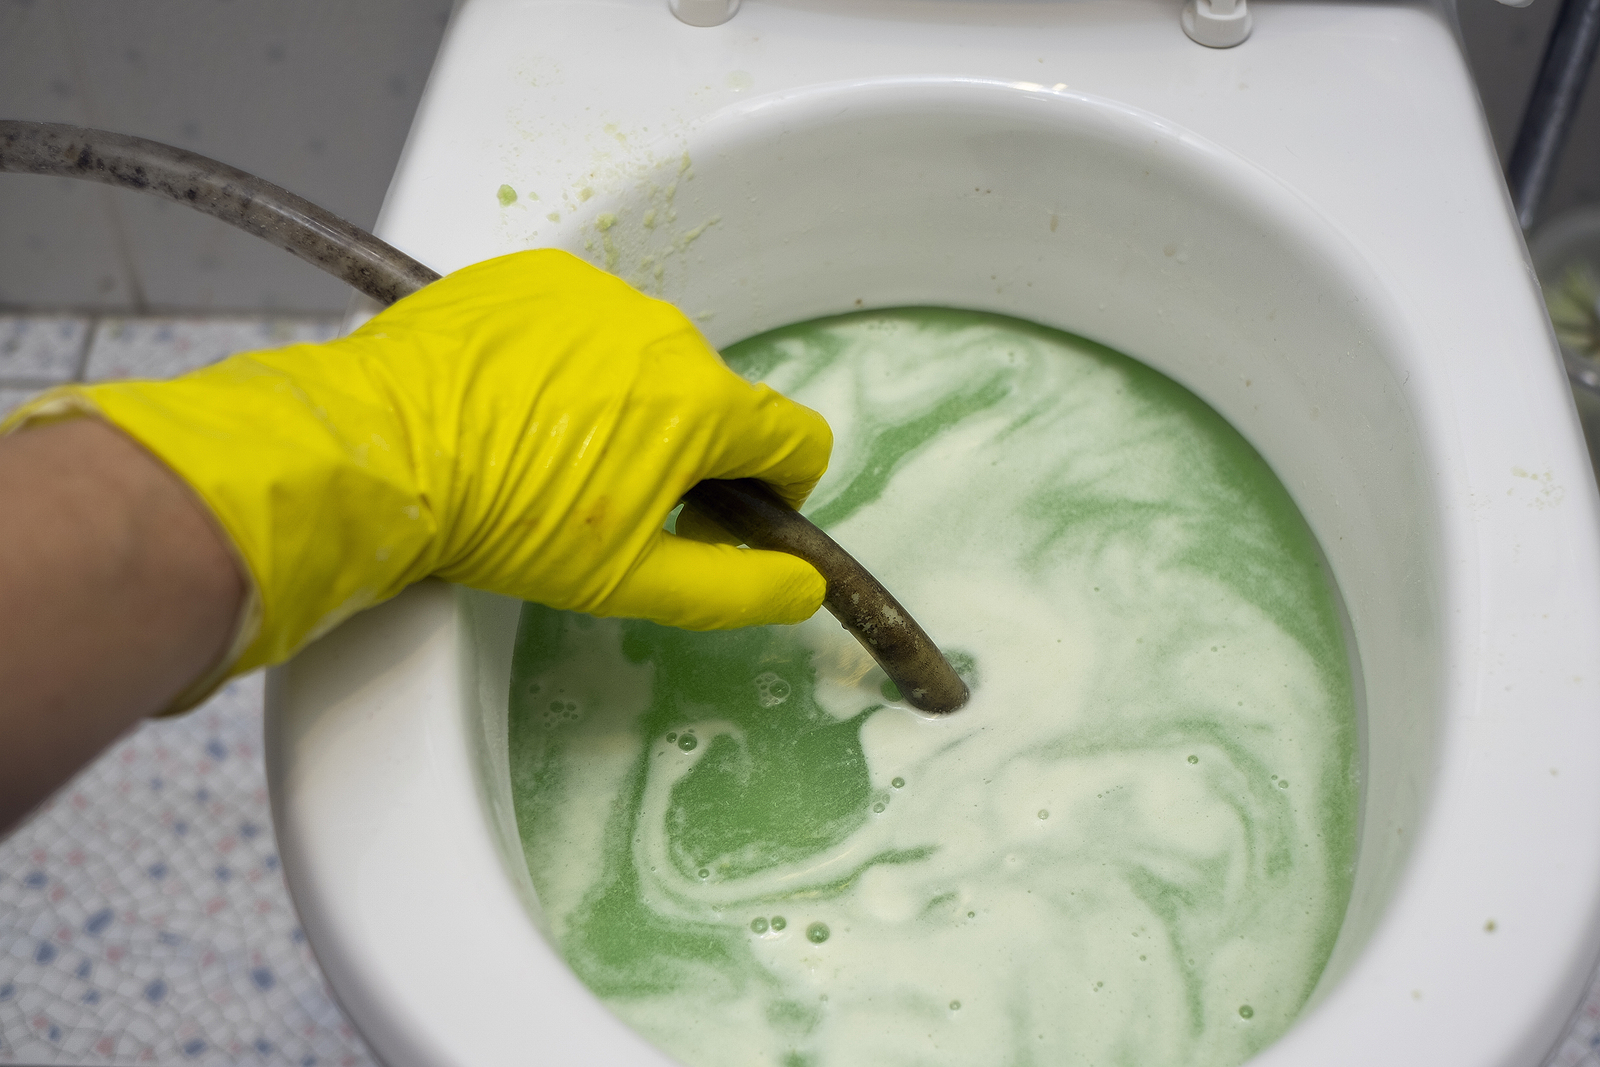 Reasons Your Toilet Keeps Clogging